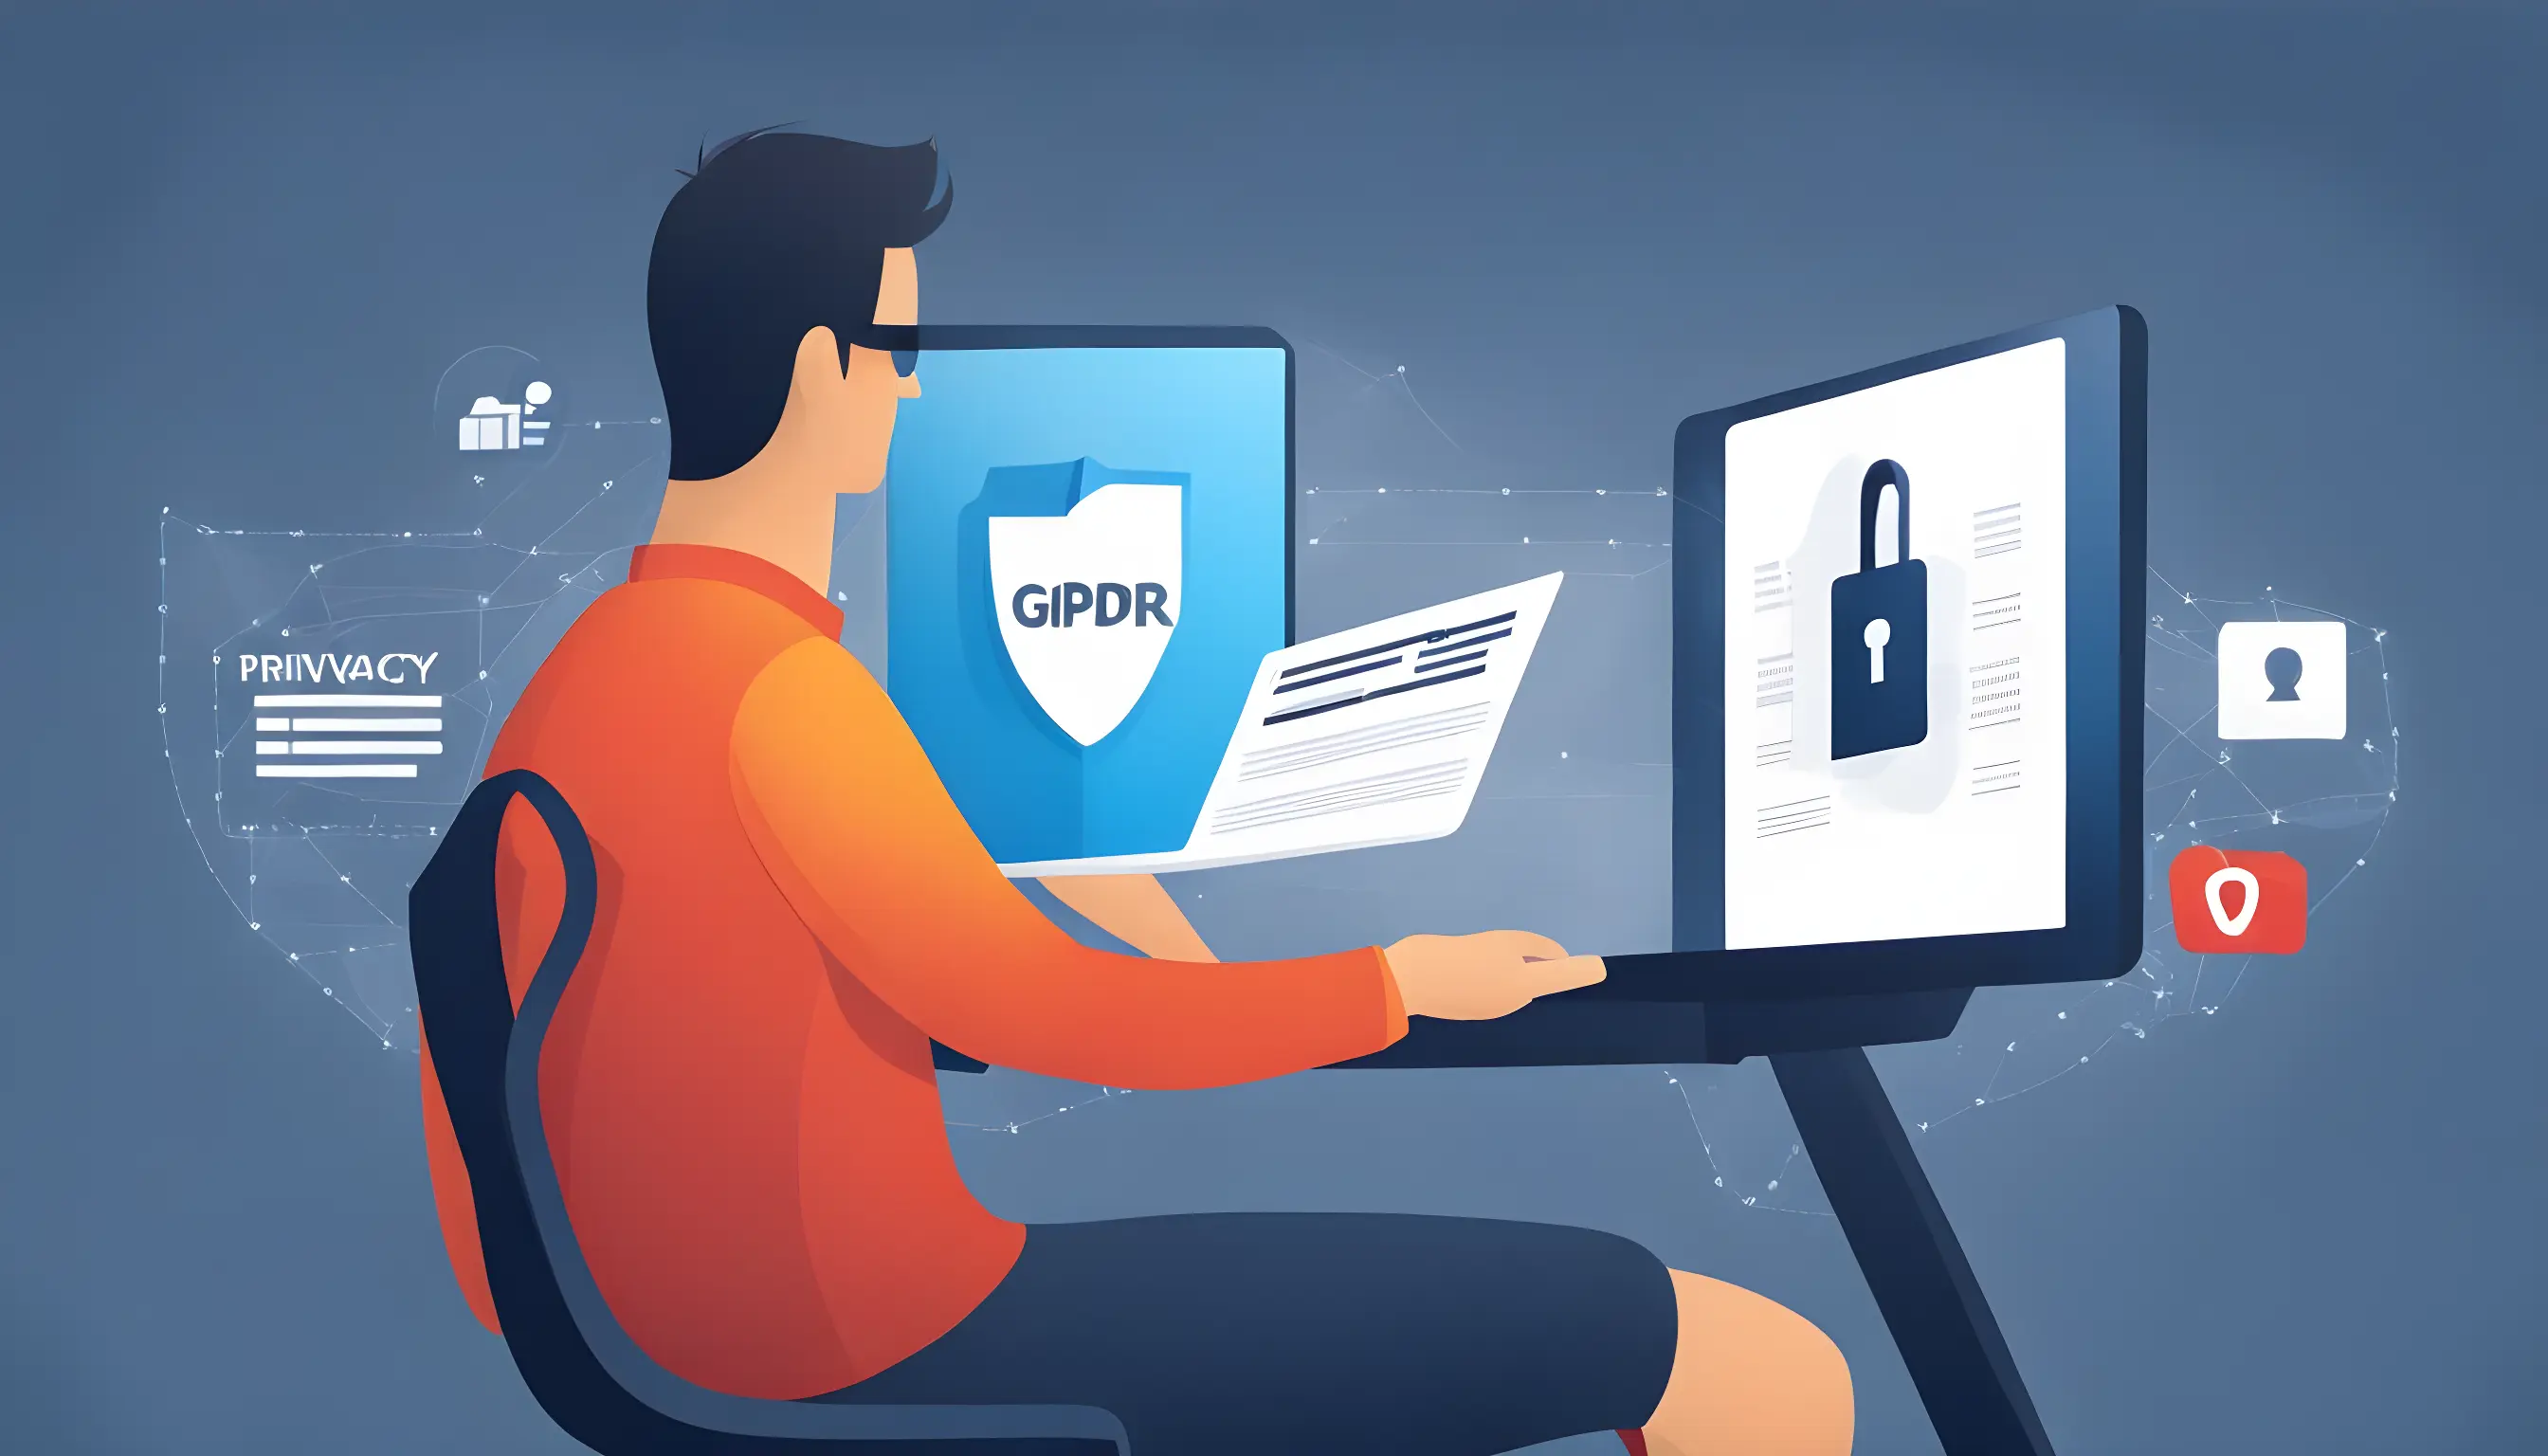 Whois Privacy and General Data Protection Regulation (GDPR)